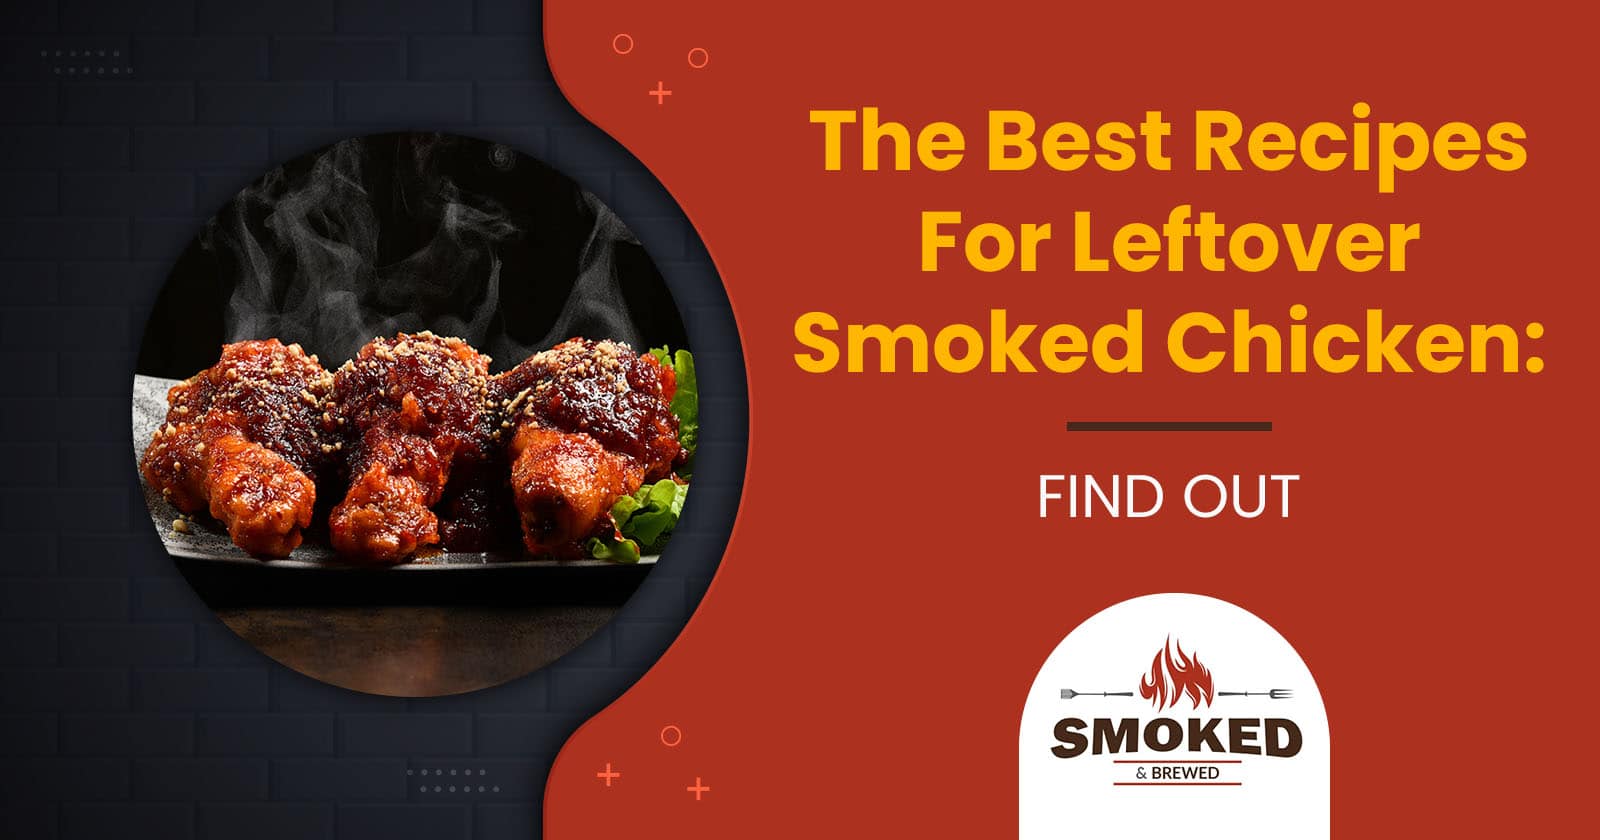 leftover smoked chicken recipes